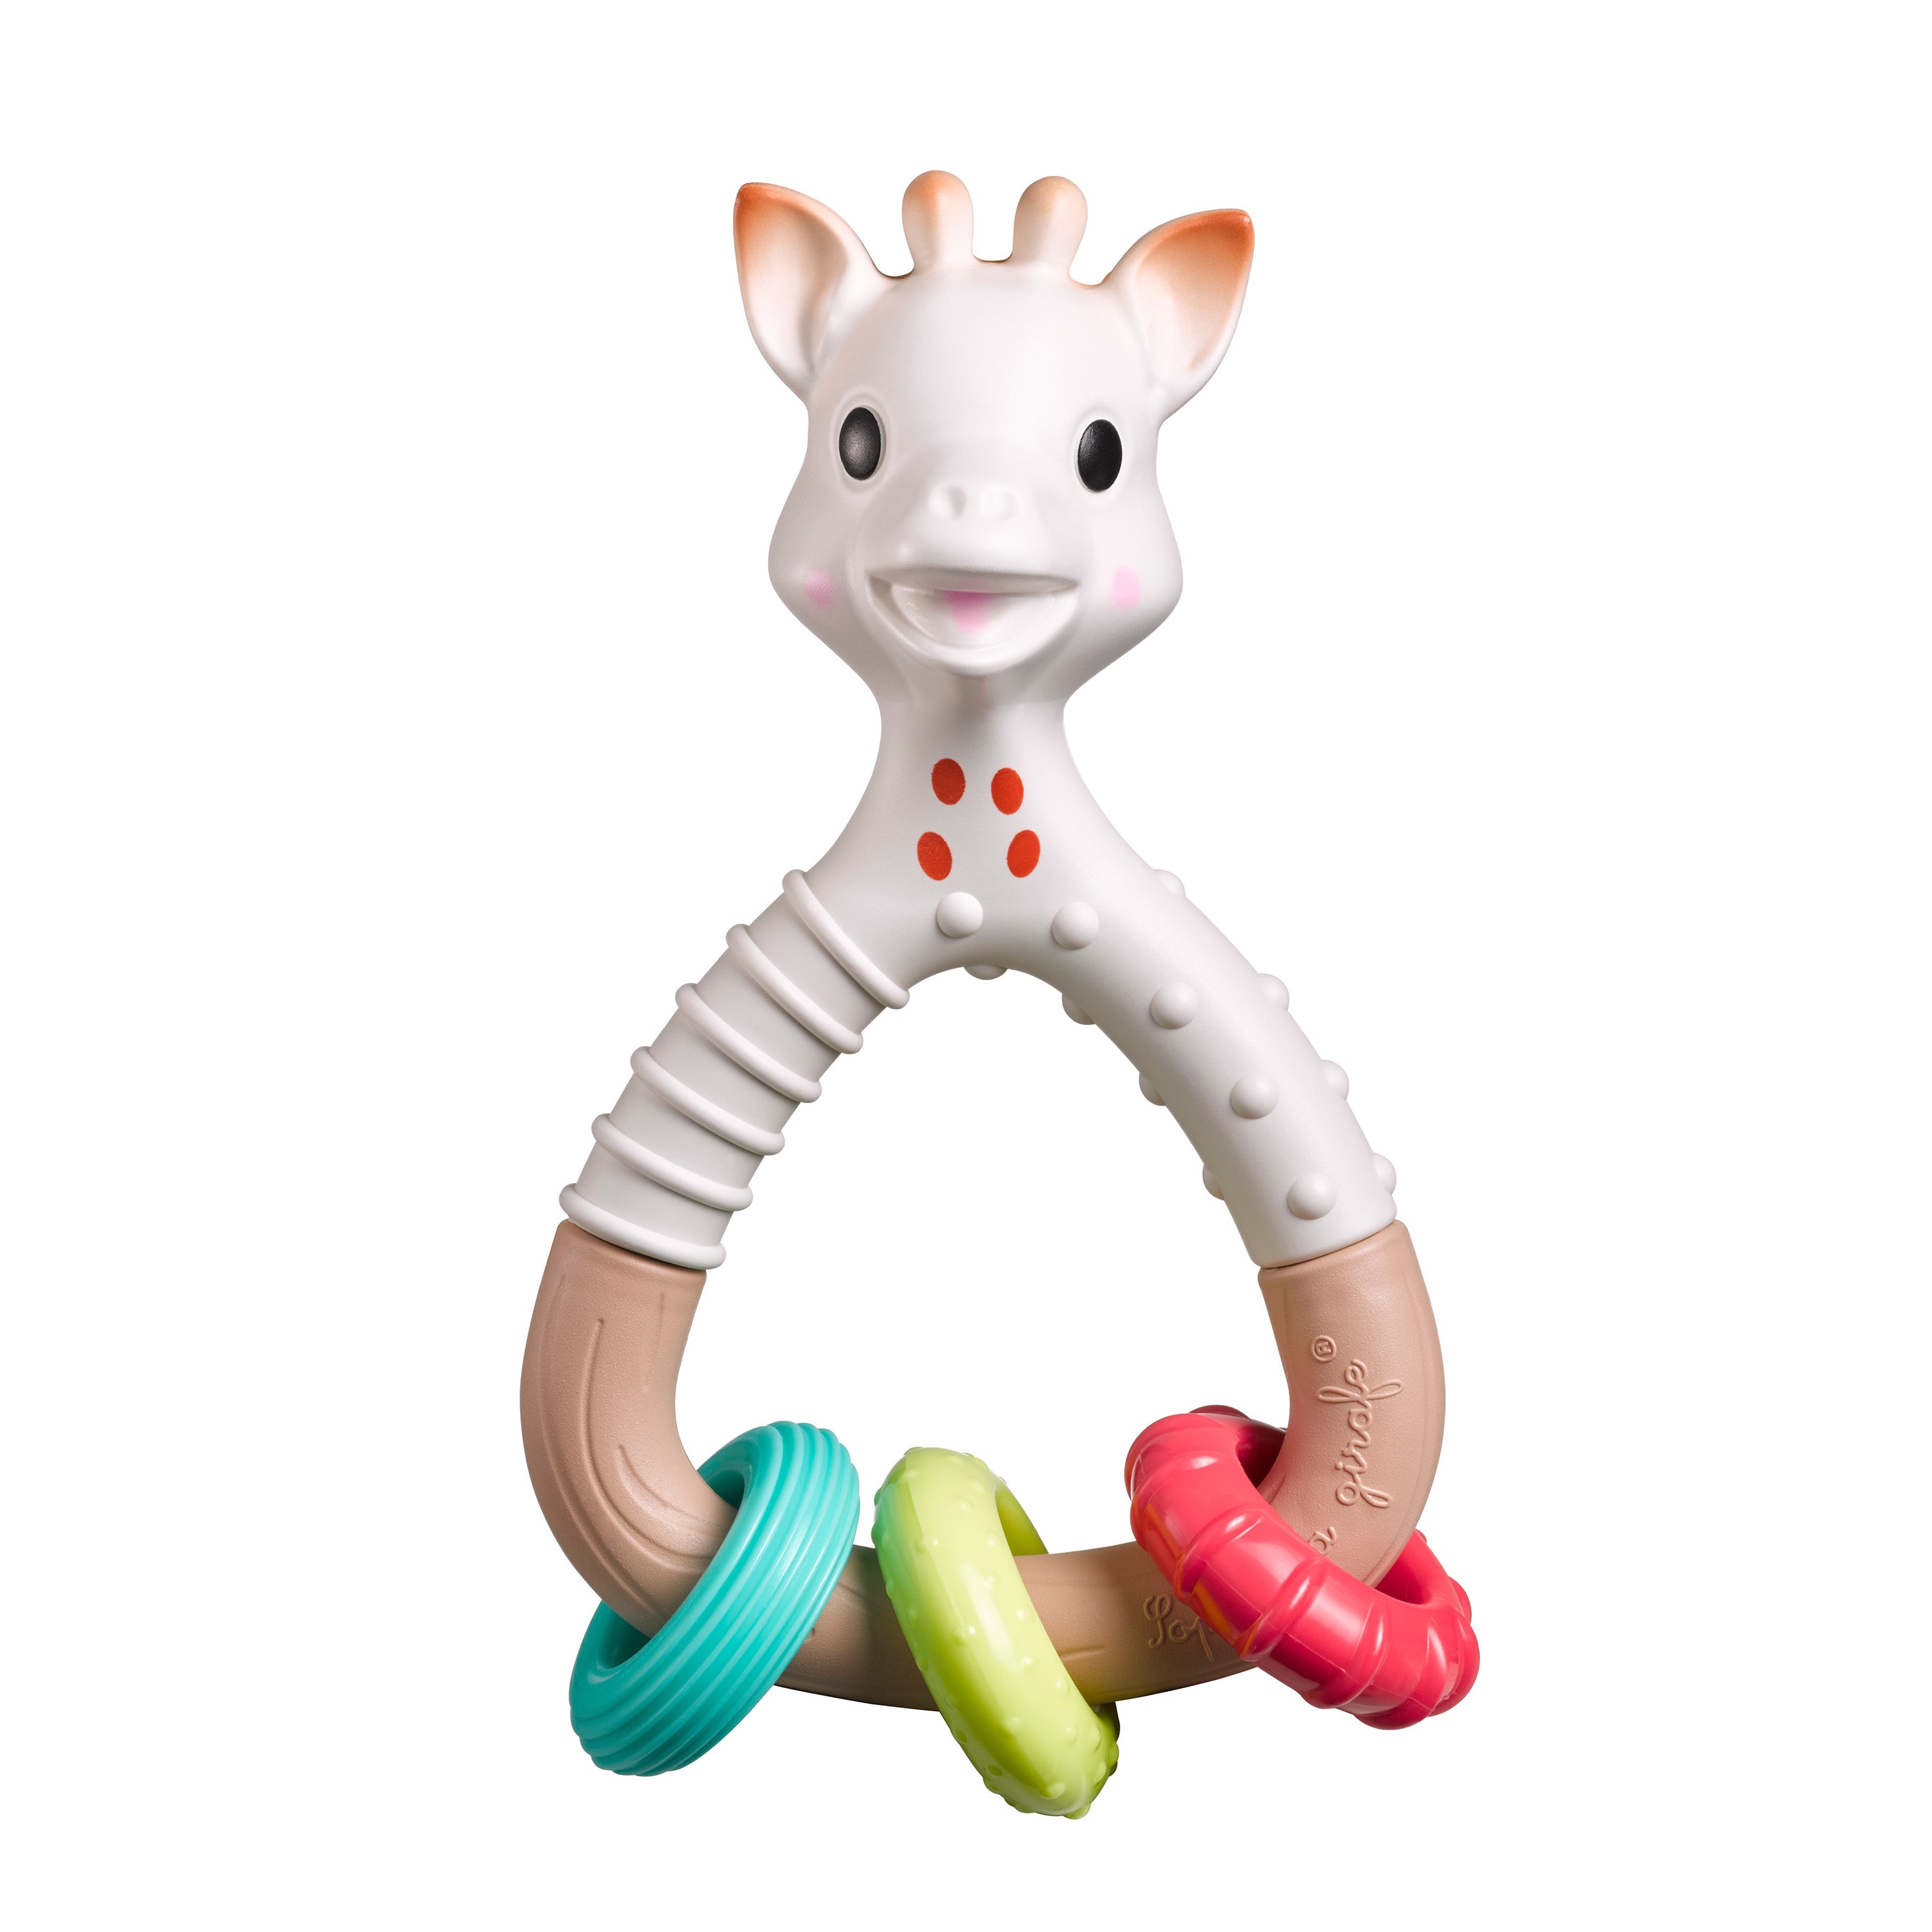 So'Pure Swaddle Ring Sophie la girafe – Calisson Toys